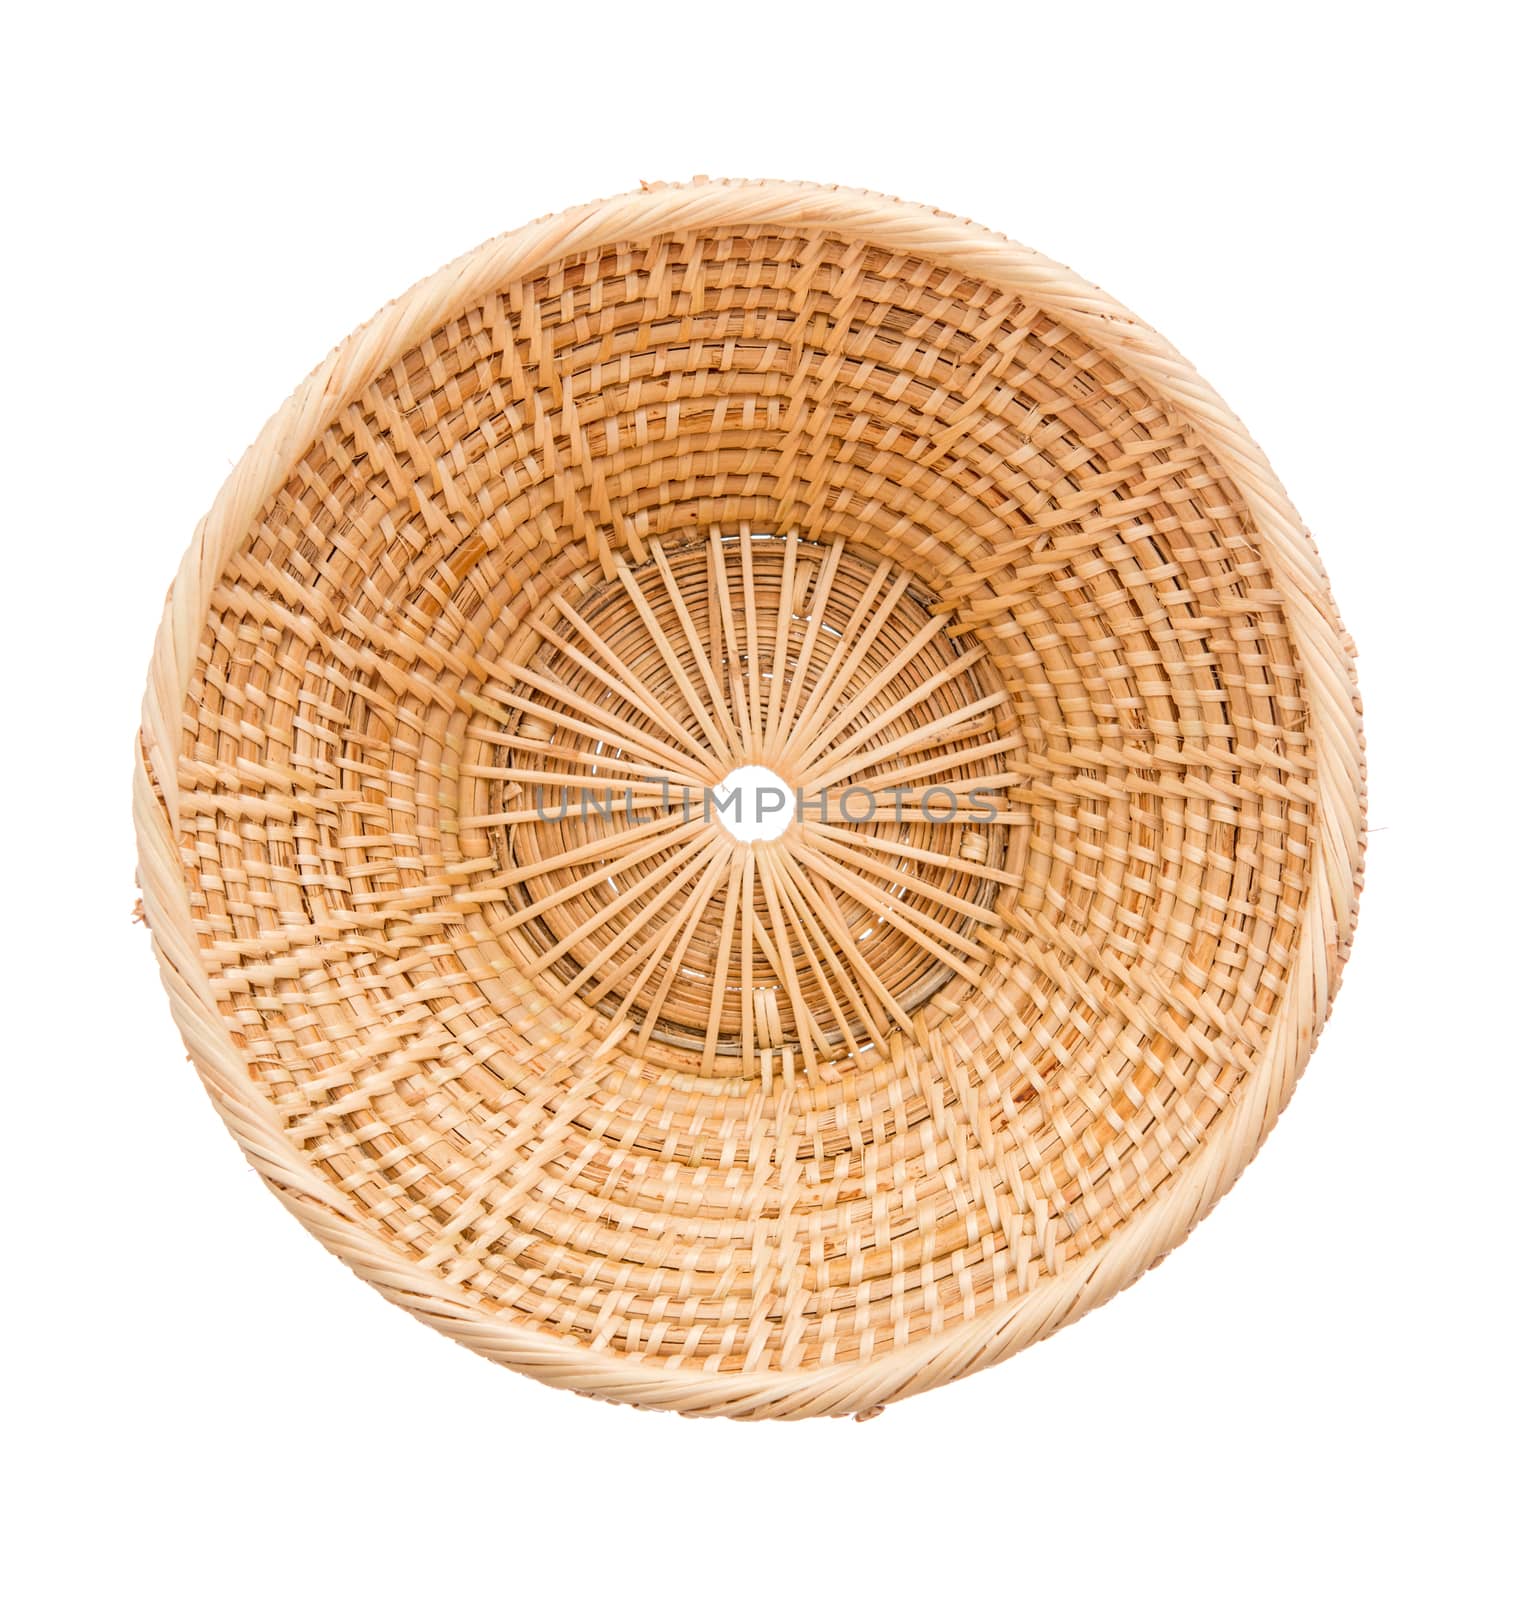 Wood basket wicker wooden in handmade top view isolate on over white background